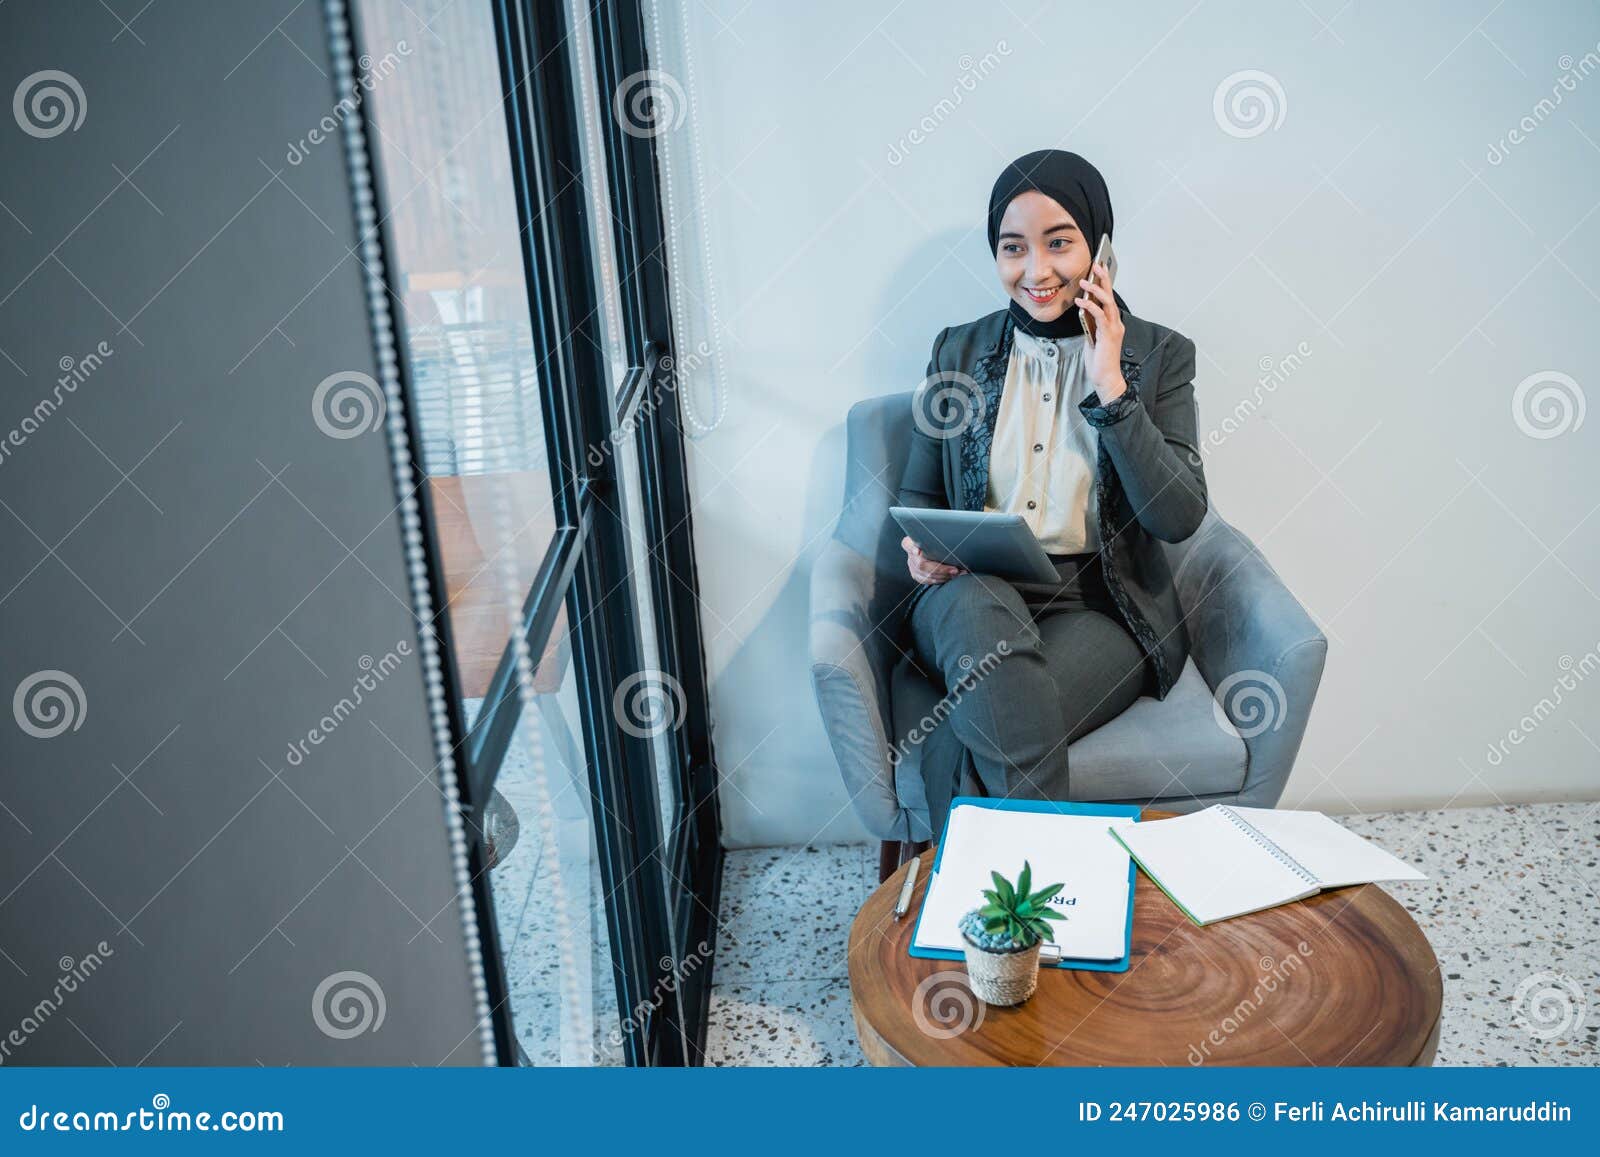 Muslim Businesswoman Making a Phone Call while Working in the Office ...